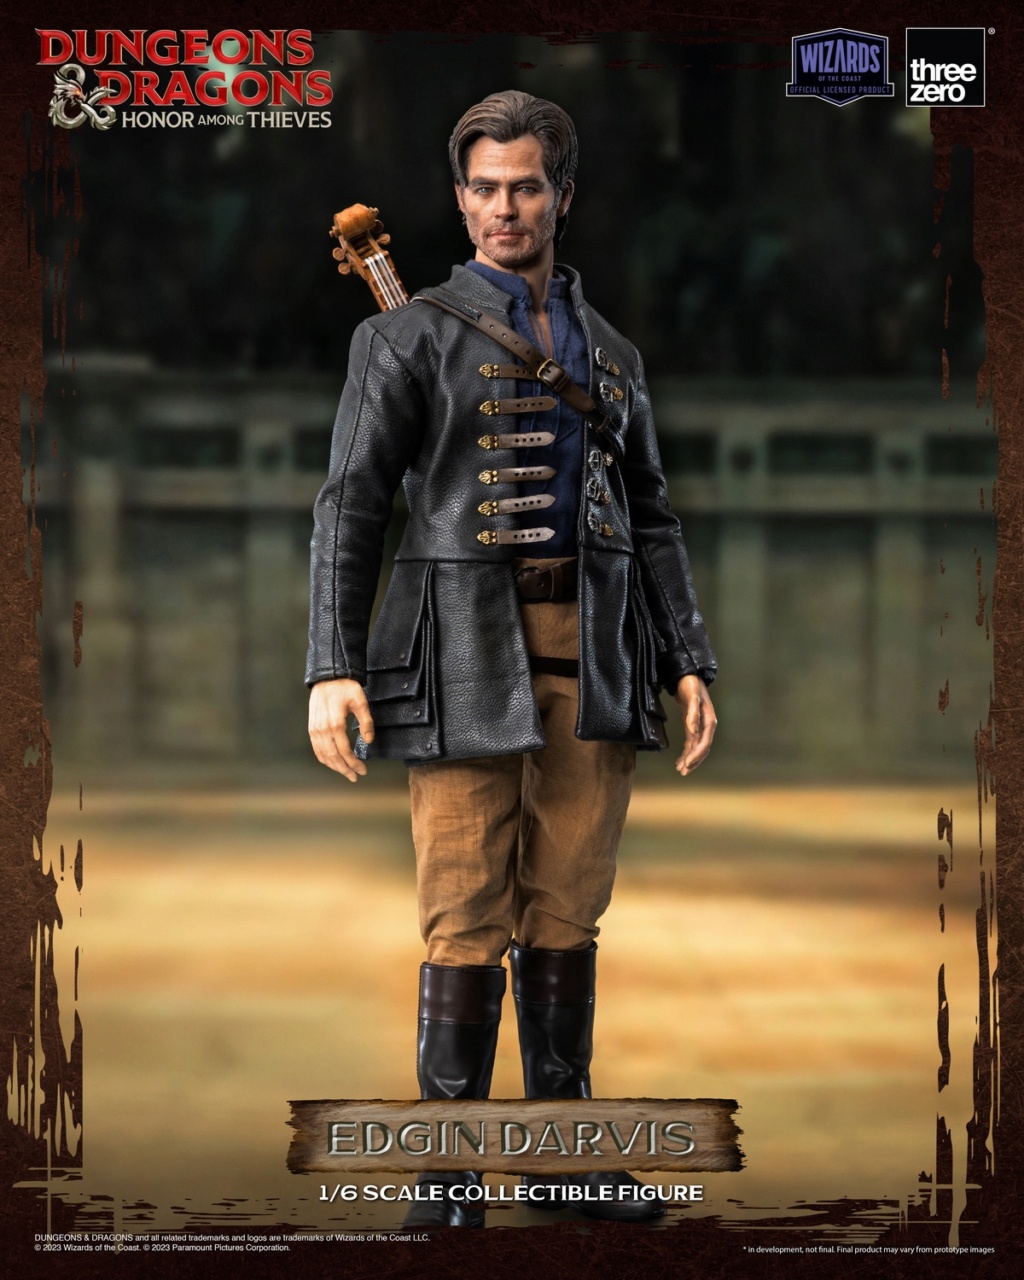 Dungeons - NEW PRODUCT: Threezero: 1/6 scale Edgin Darvis - Dungeons & Dragons: Honor Among Thieves action figure 16542010